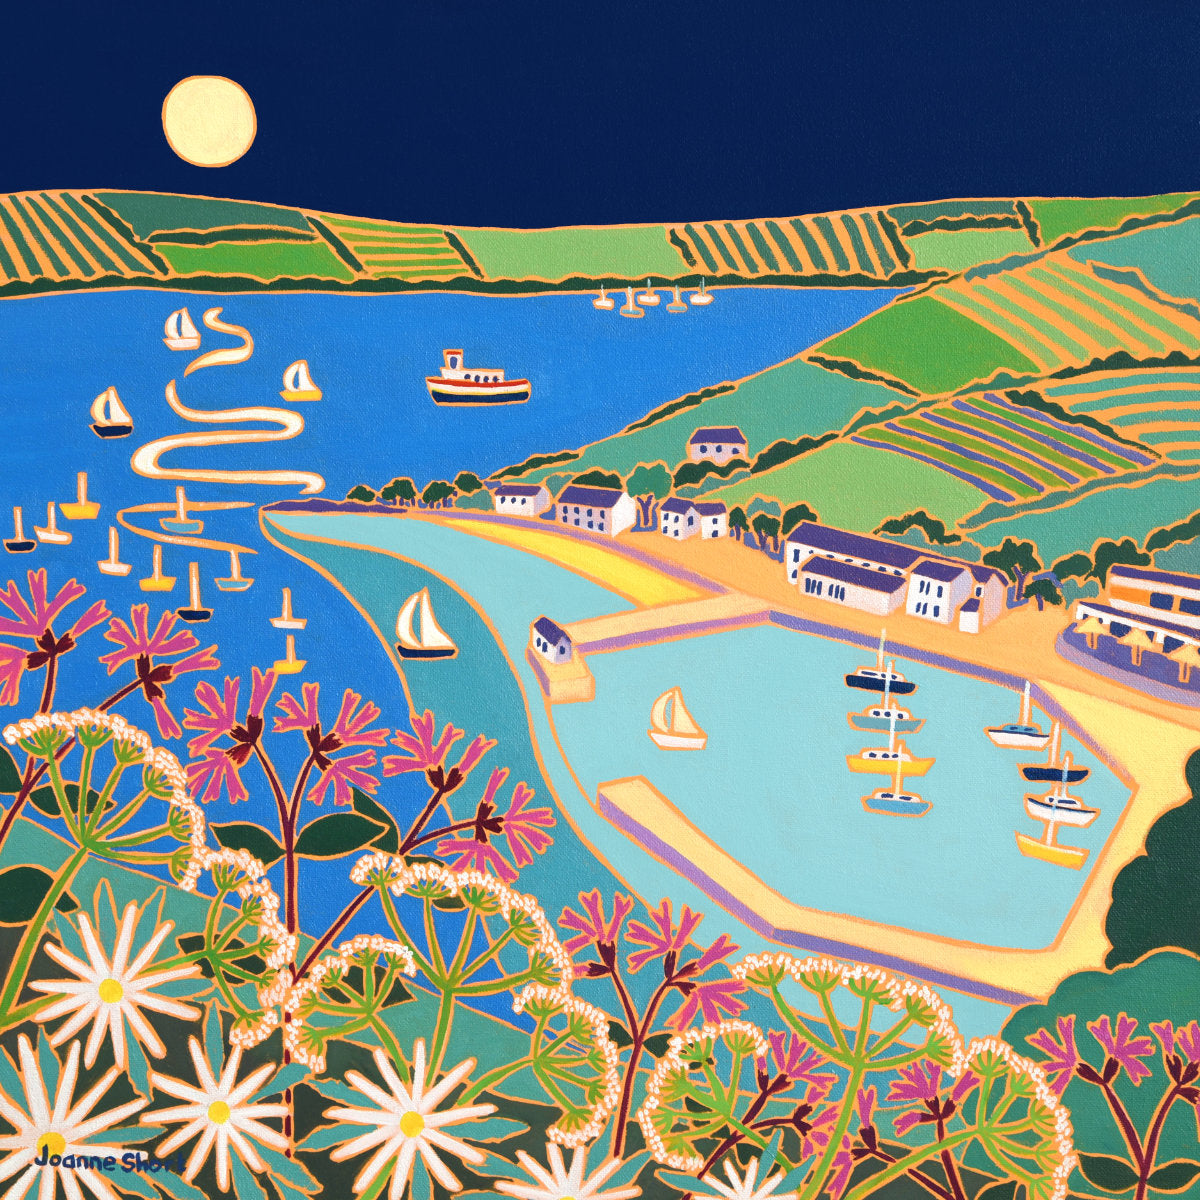 'Full Moon over Mylor Harbour',  18 x 18 inches, oil on canvas. Painting by Cornish Artist Joanne Short. Cornish Art from our Cornwall Art Gallery